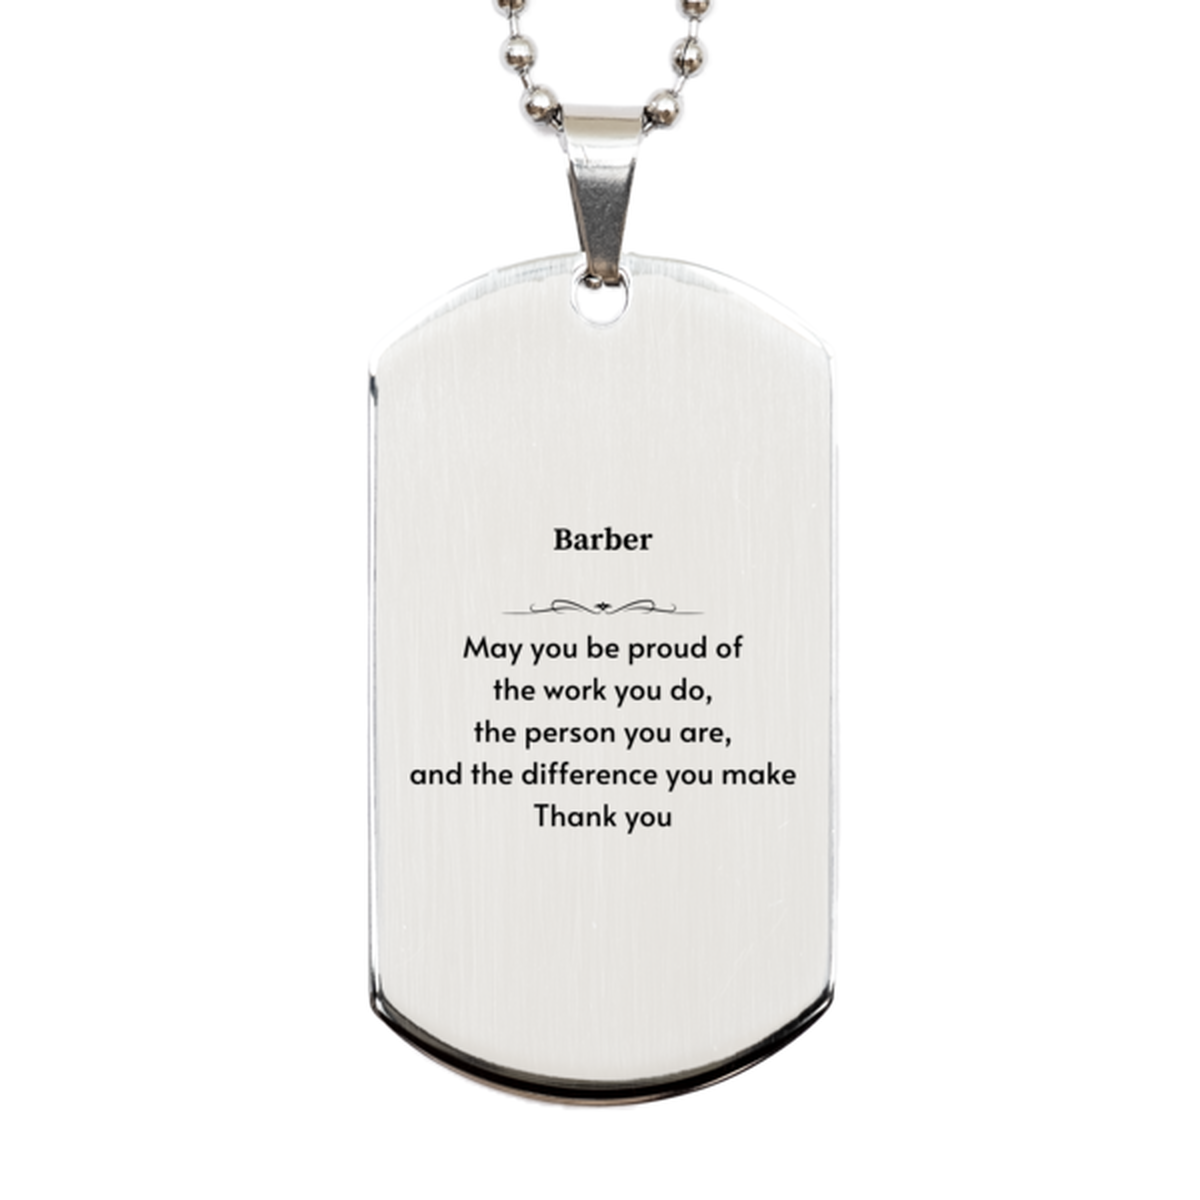 Heartwarming Silver Dog Tag Retirement Coworkers Gifts for Barber, Barber May You be proud of the work you do, the person you are Gifts for Boss Men Women Friends